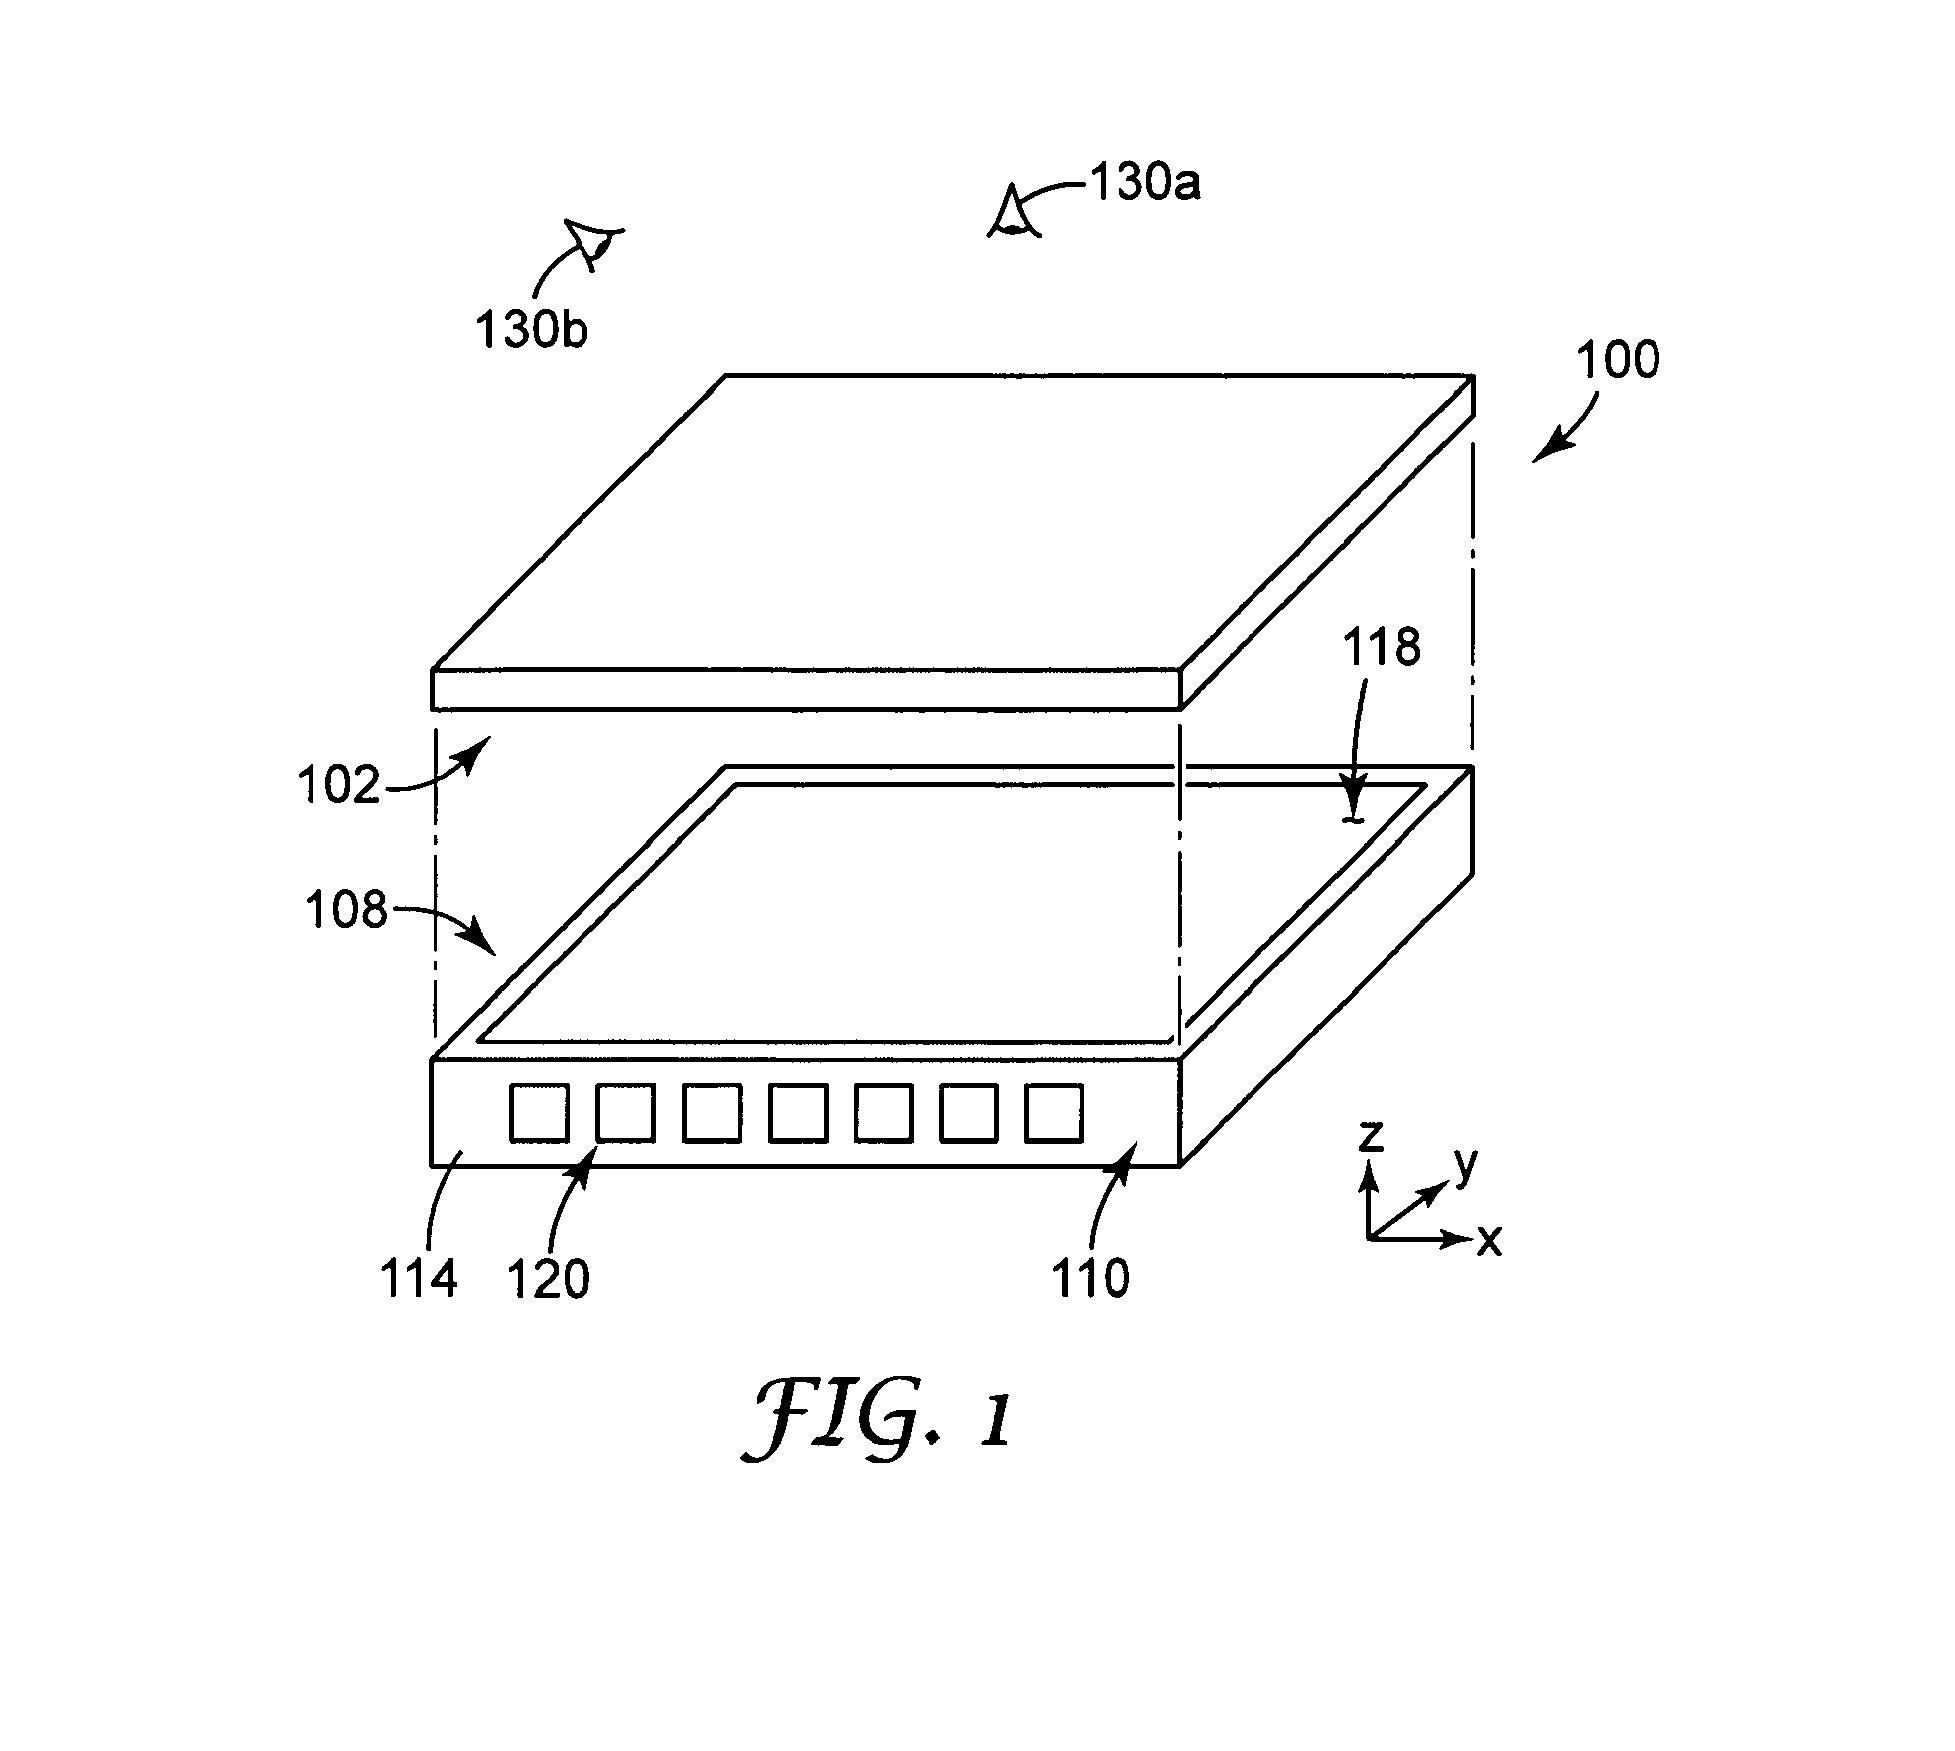 Edge-lit backlight having light recycling cavity with concave transflector